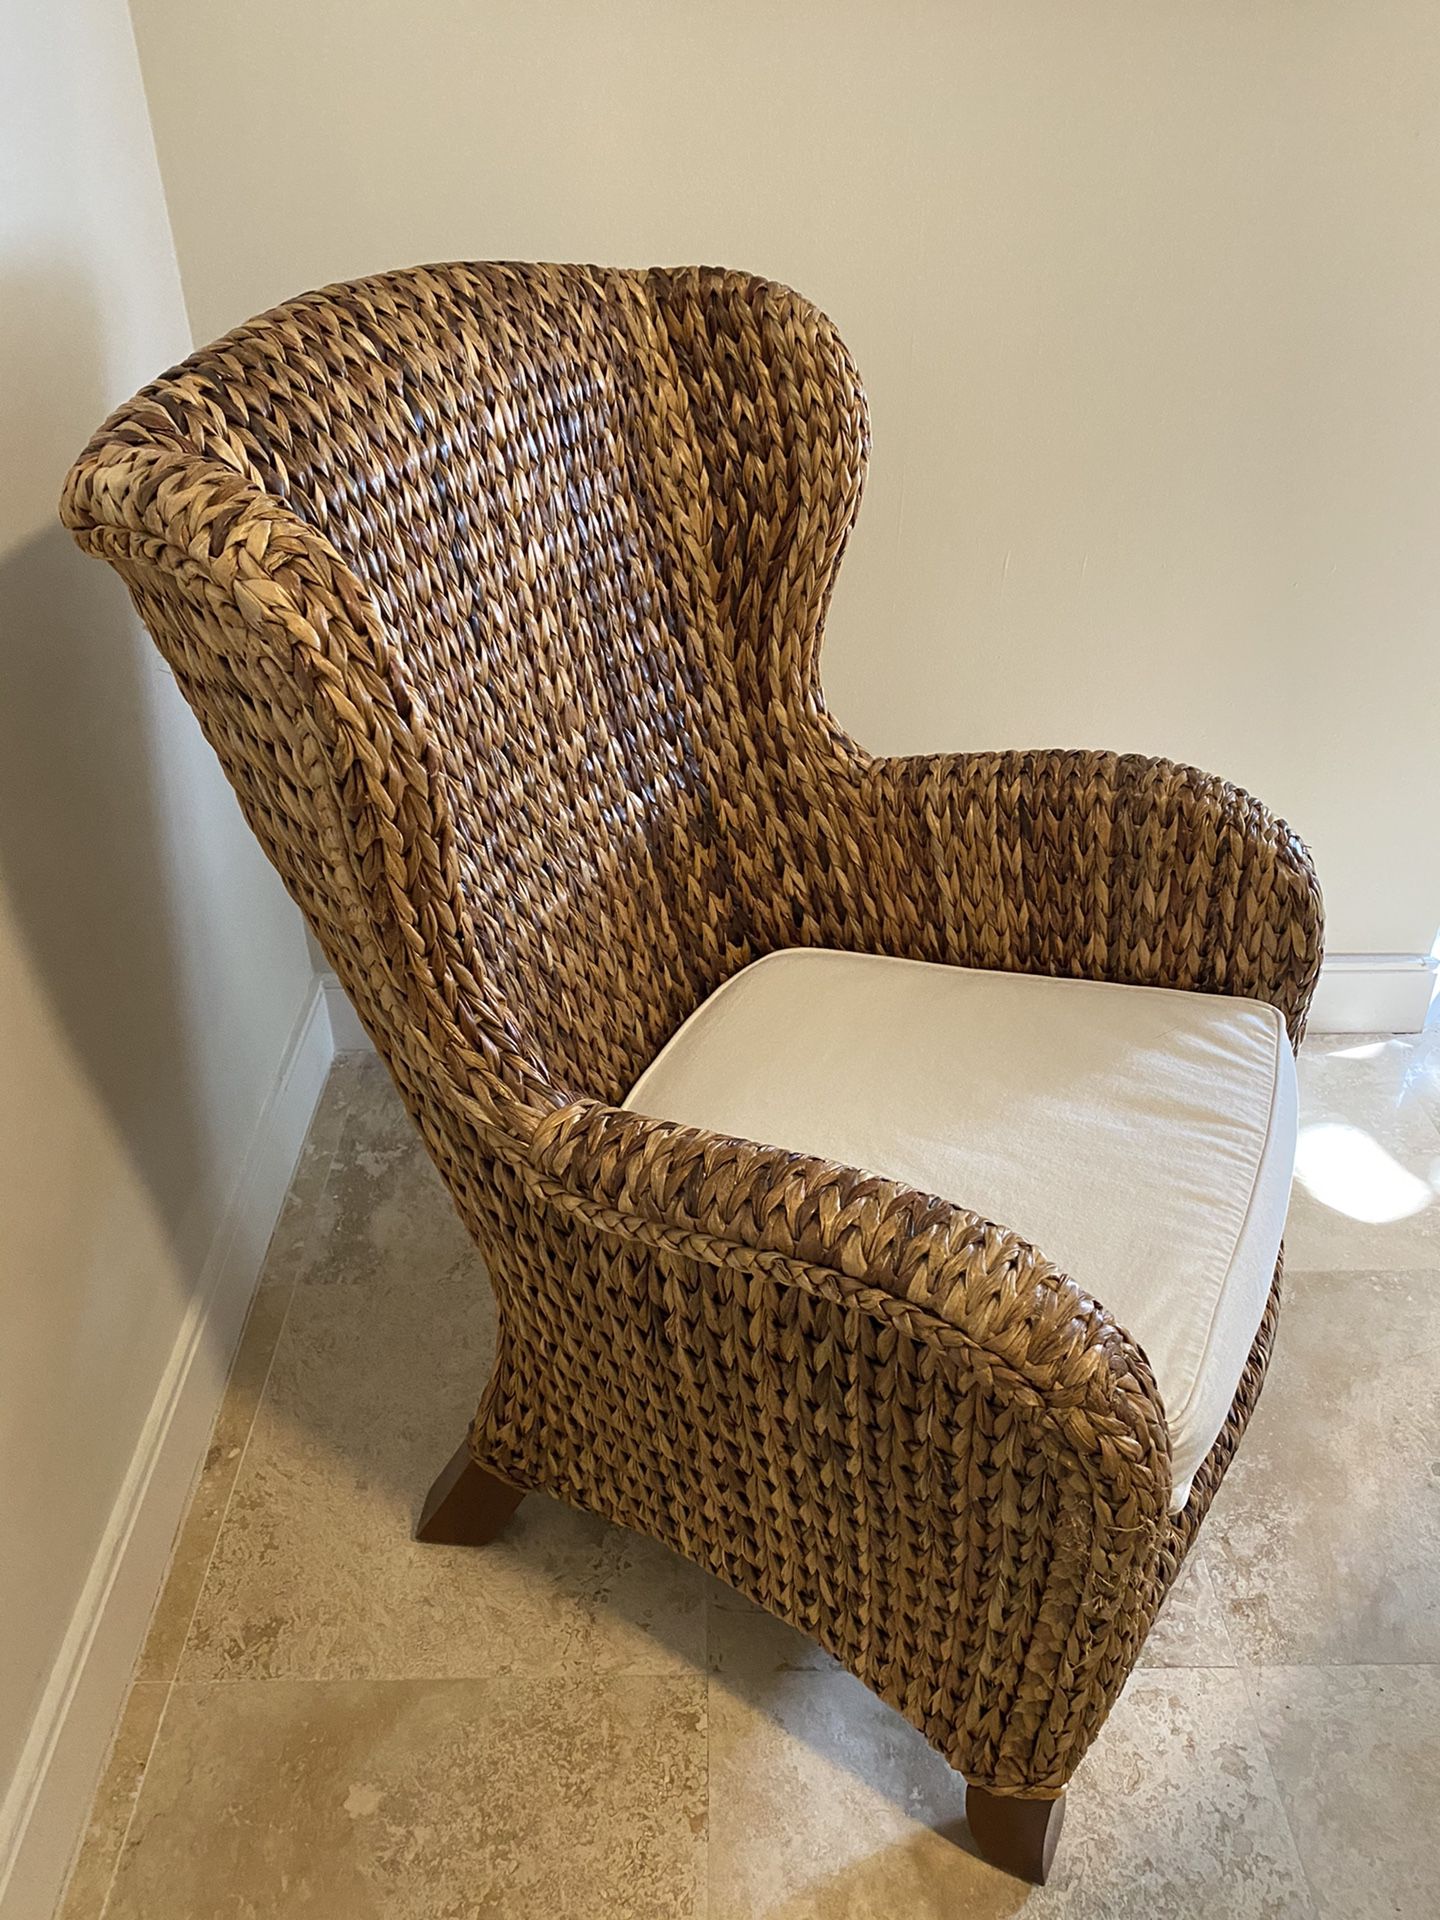 SEAGRASS WINGBACK CHAIR FROM POTTERY BARN